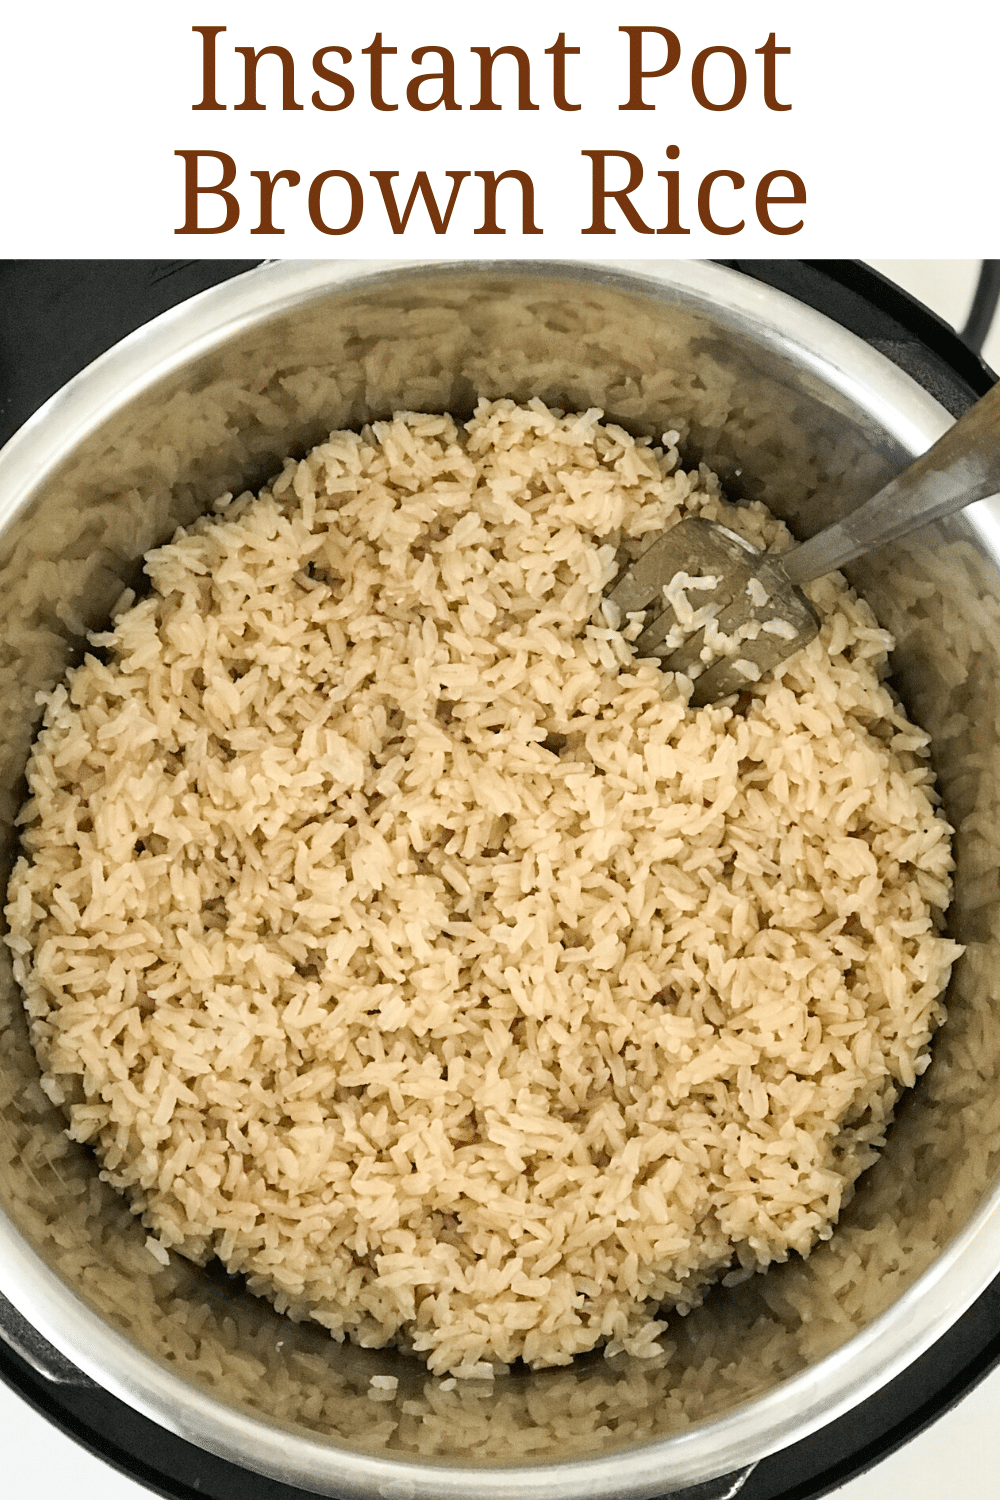 A bowl of rice on a plate, with Brown rice and Matta rice